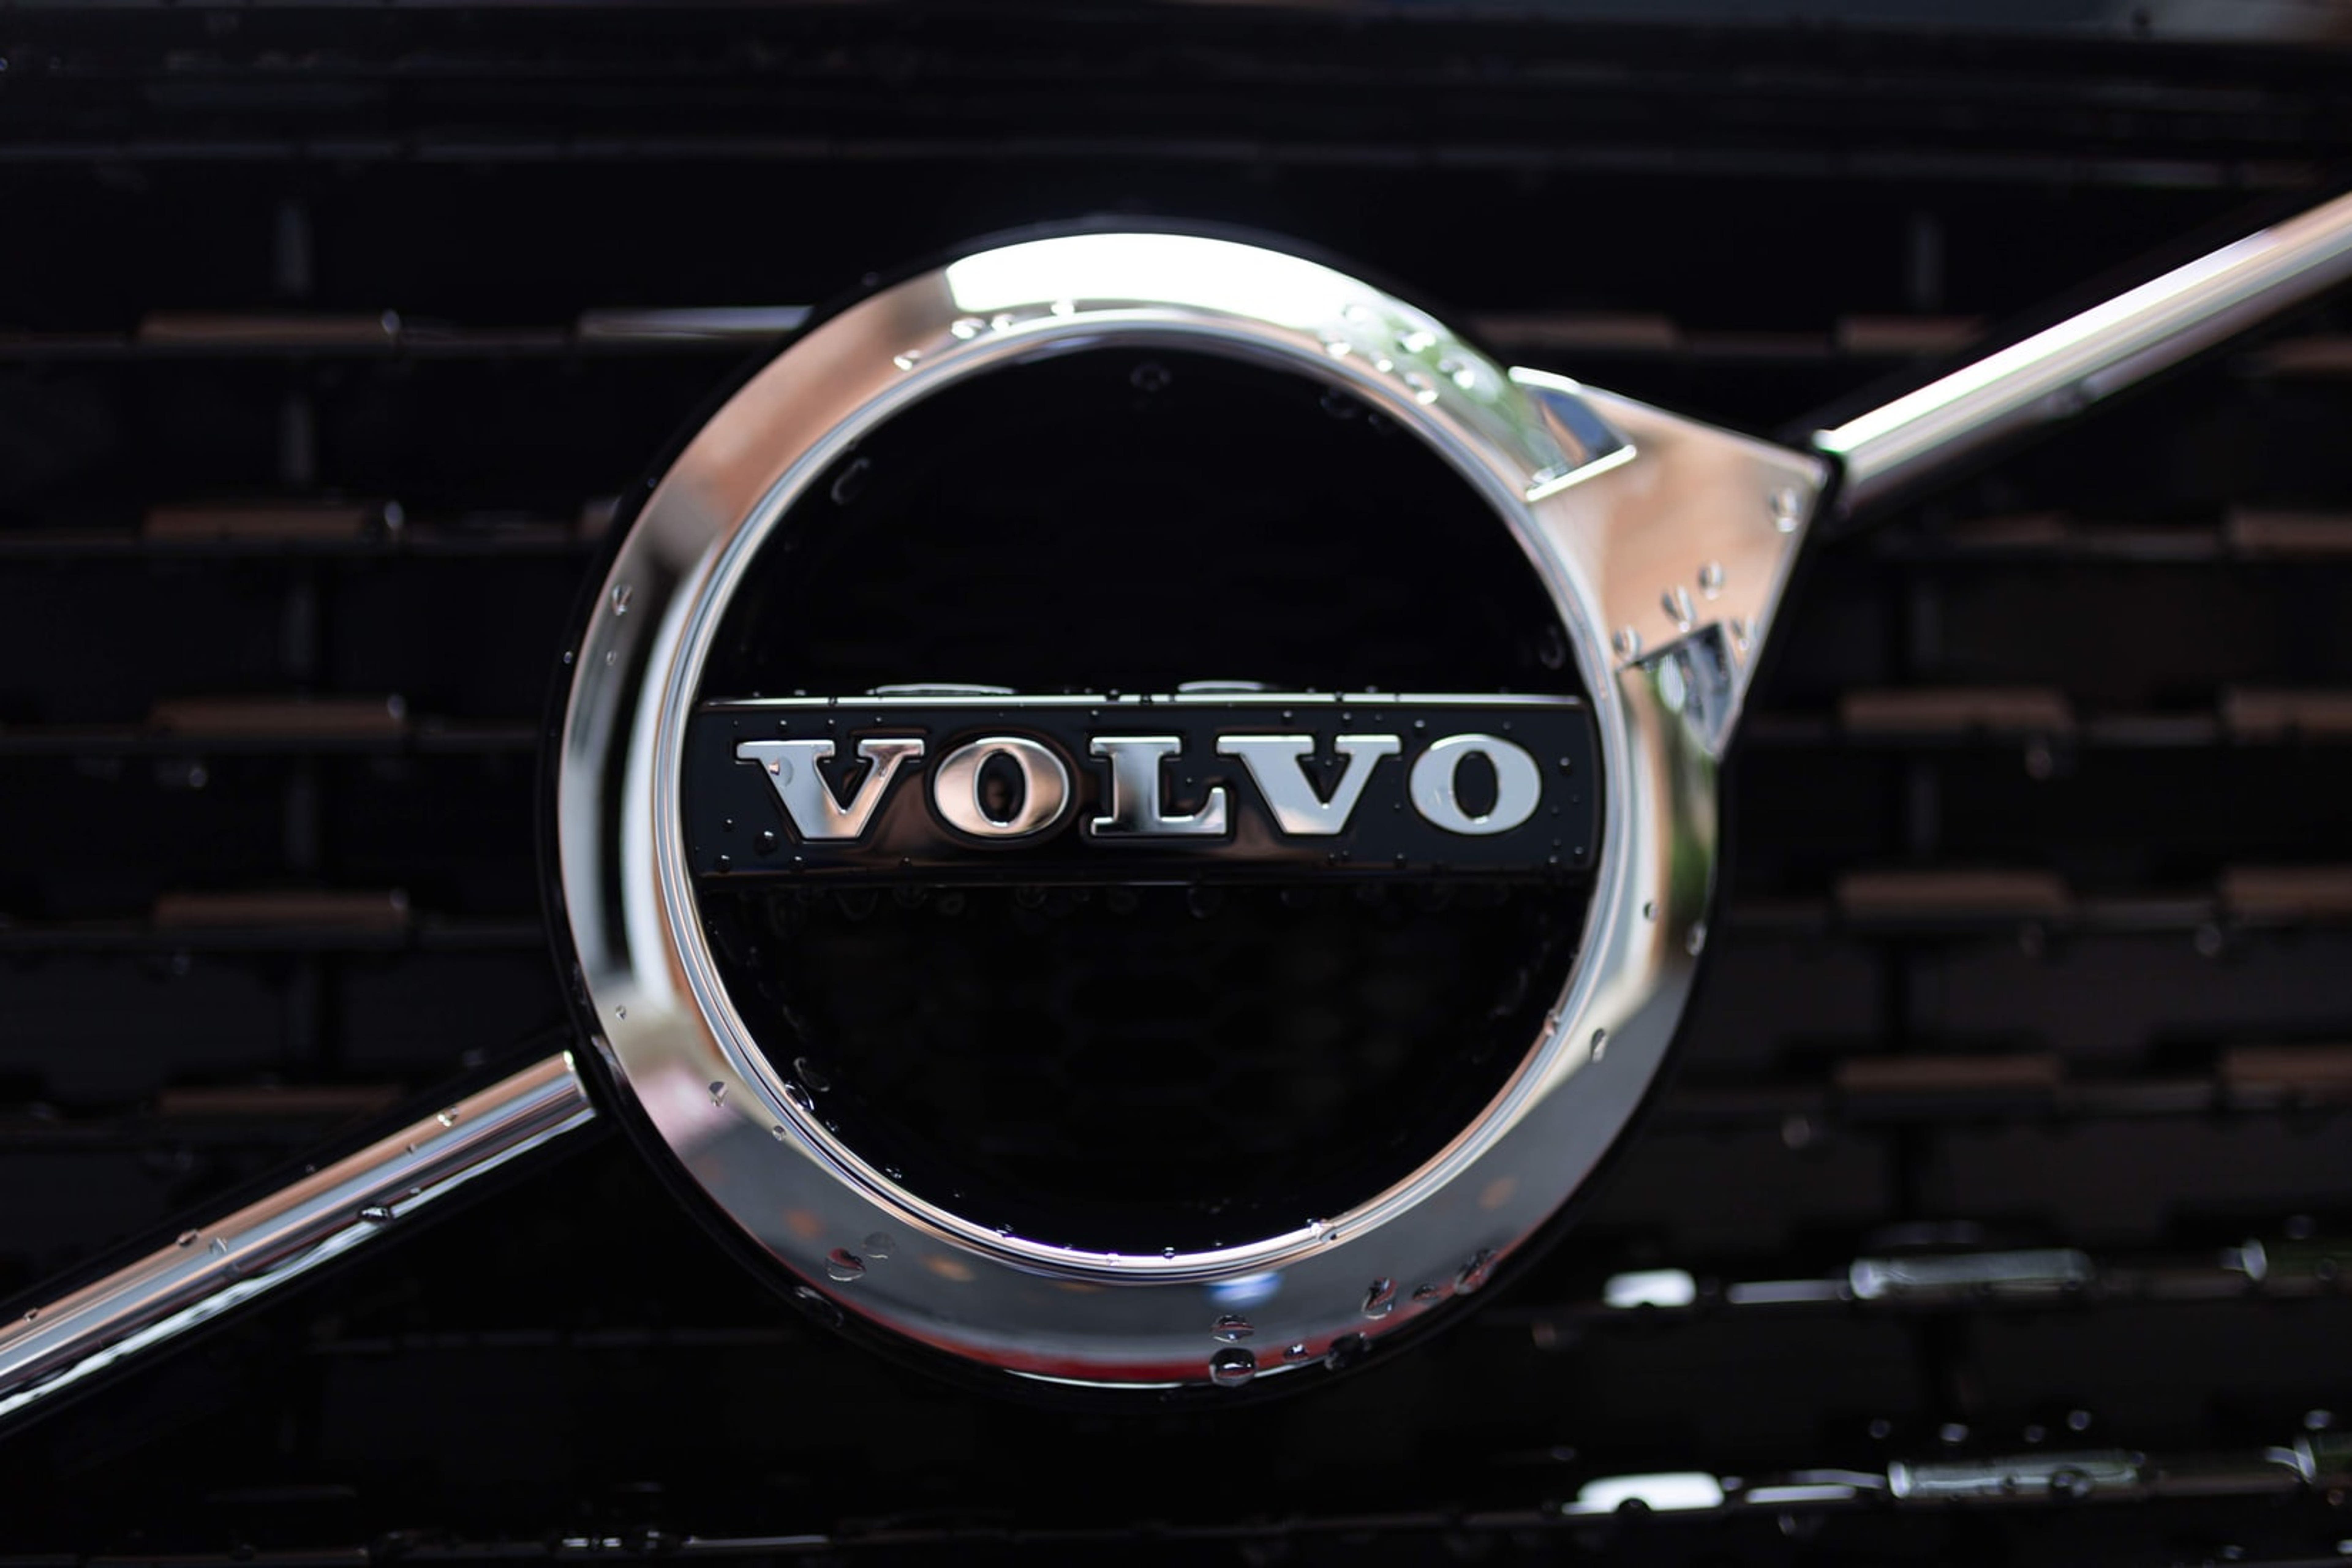 54,000 Volvo Vehicles Recalled After Fatality Connected To Air Bag Defect